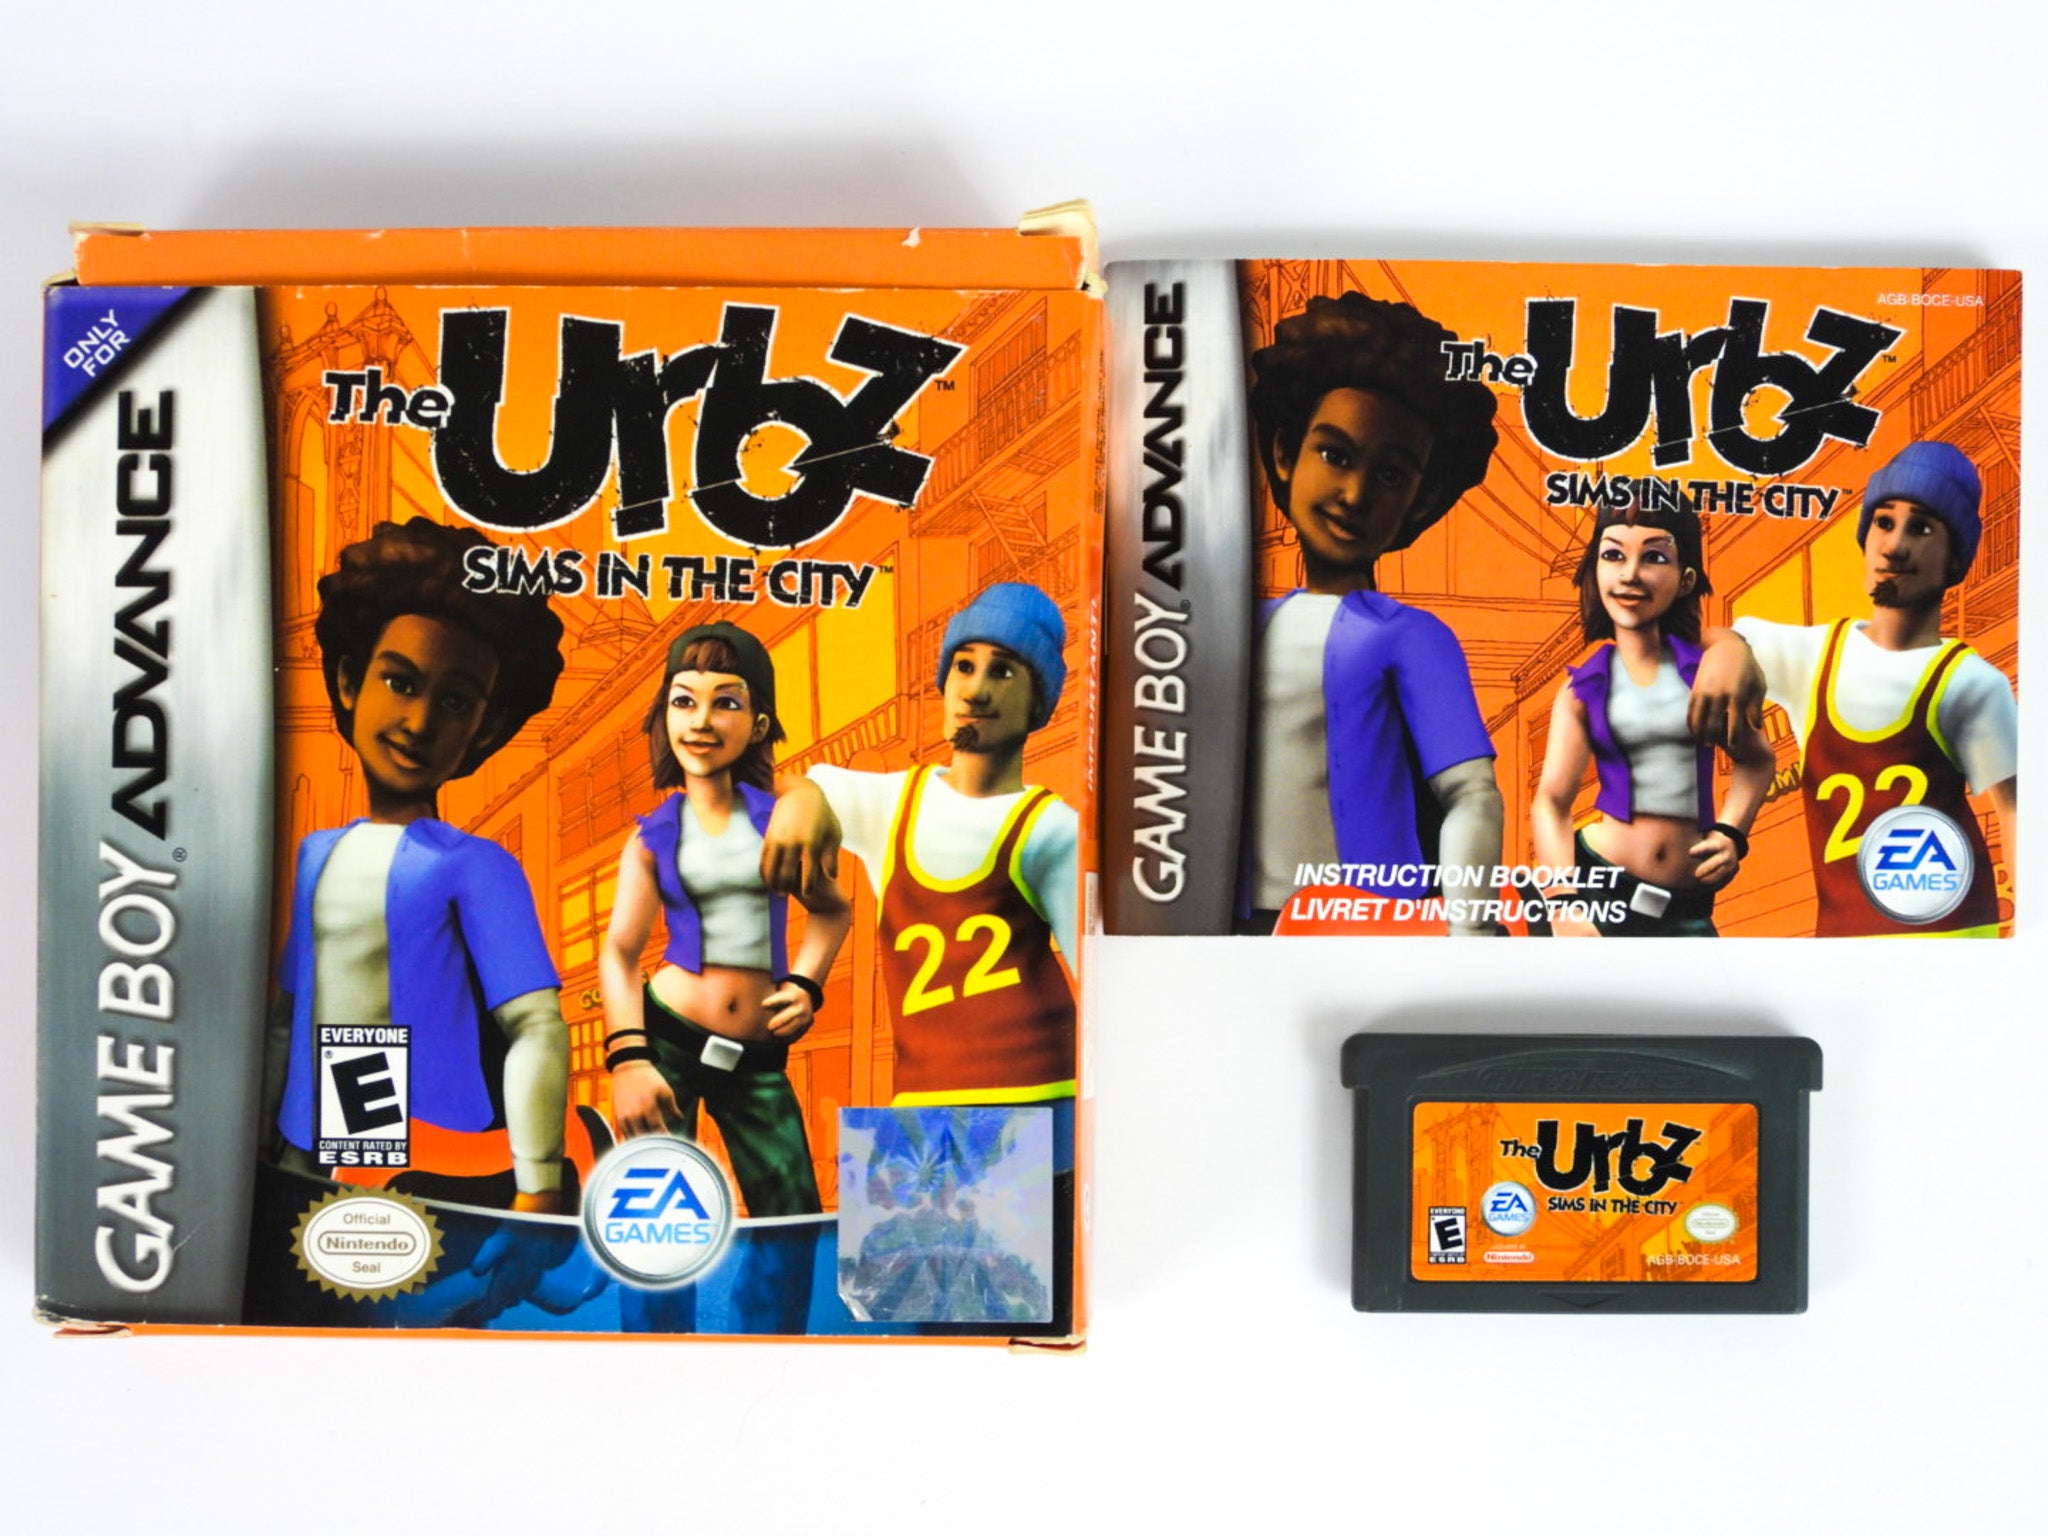 The Urbz Sims in the City (Game Boy Advance / GBA) – RetroMTL